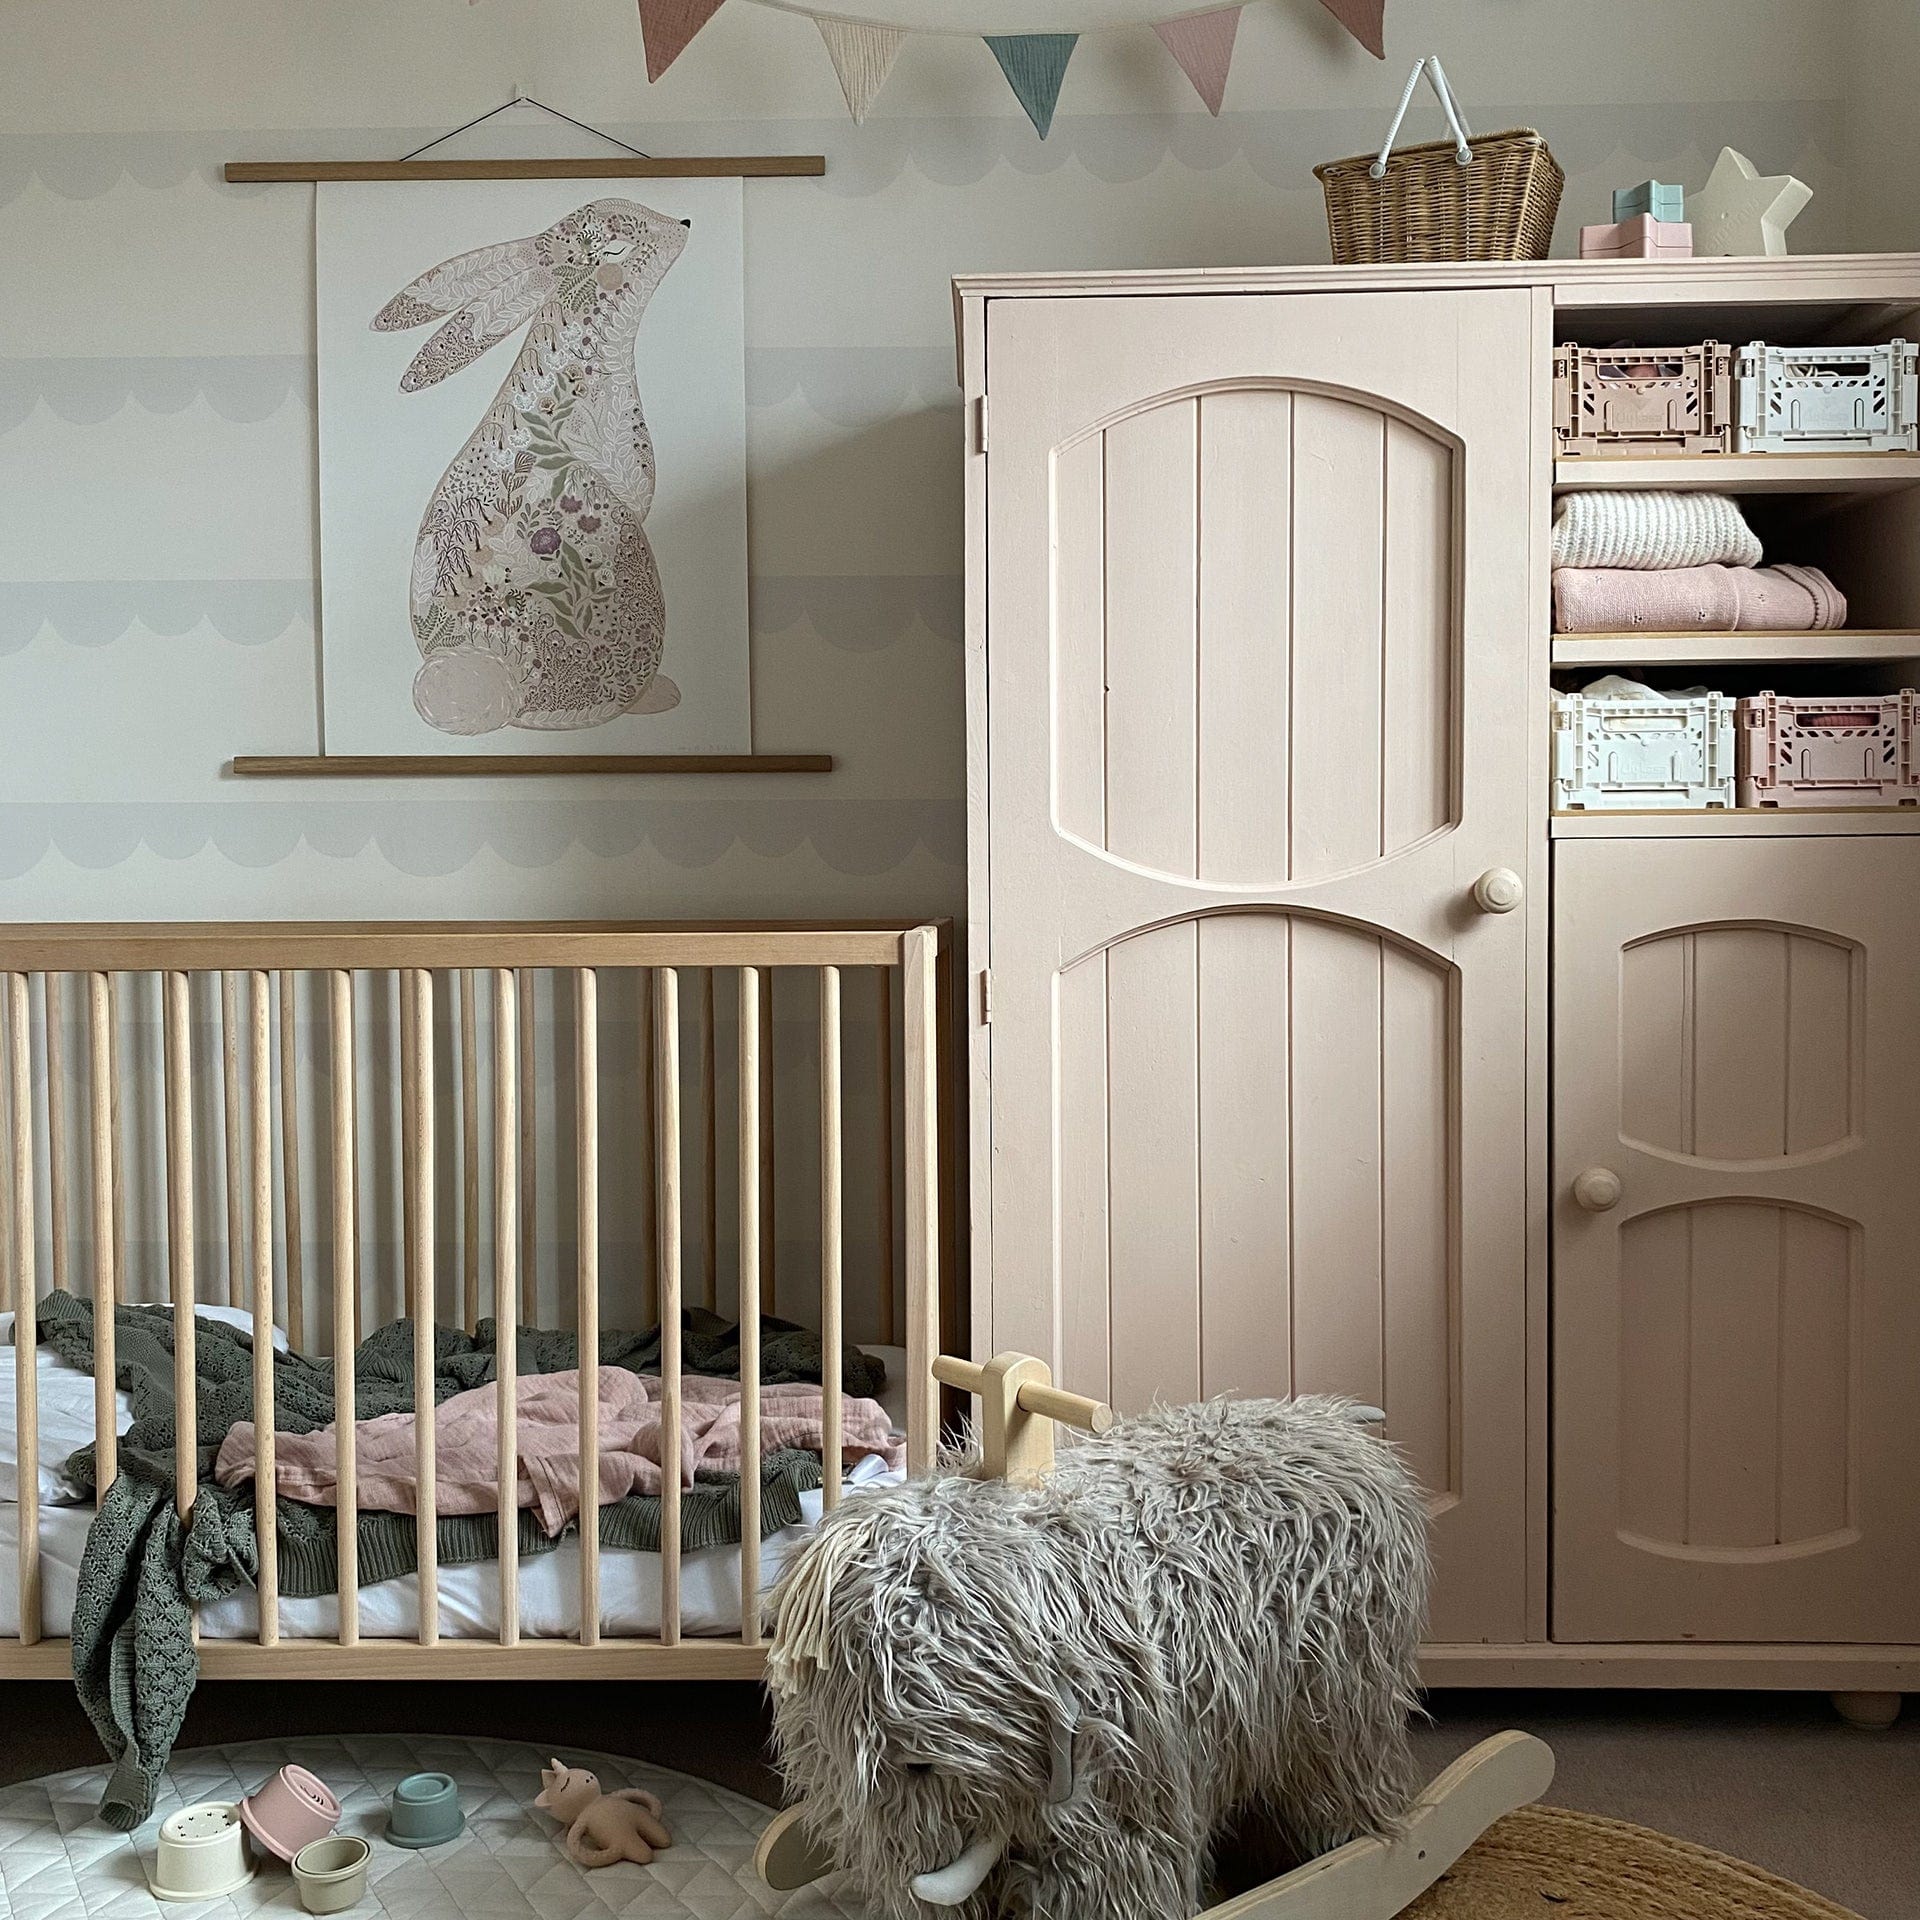 A wooden cot, with blankets strewn inside, and vintage wooden kids wardrobe, painted in a dusty pink, against a wall with scallop wallpaper, with a Kids Concept Woolly Mammoth rocker and Liewood bath toys in the foreground. On the wardrobe shelves, there are Aykasa Crates and on top of the wardrobe is an Olli Ella Piki Basket. Over the cot in a wide oak hanger is our Floral Bunny art print in pink.